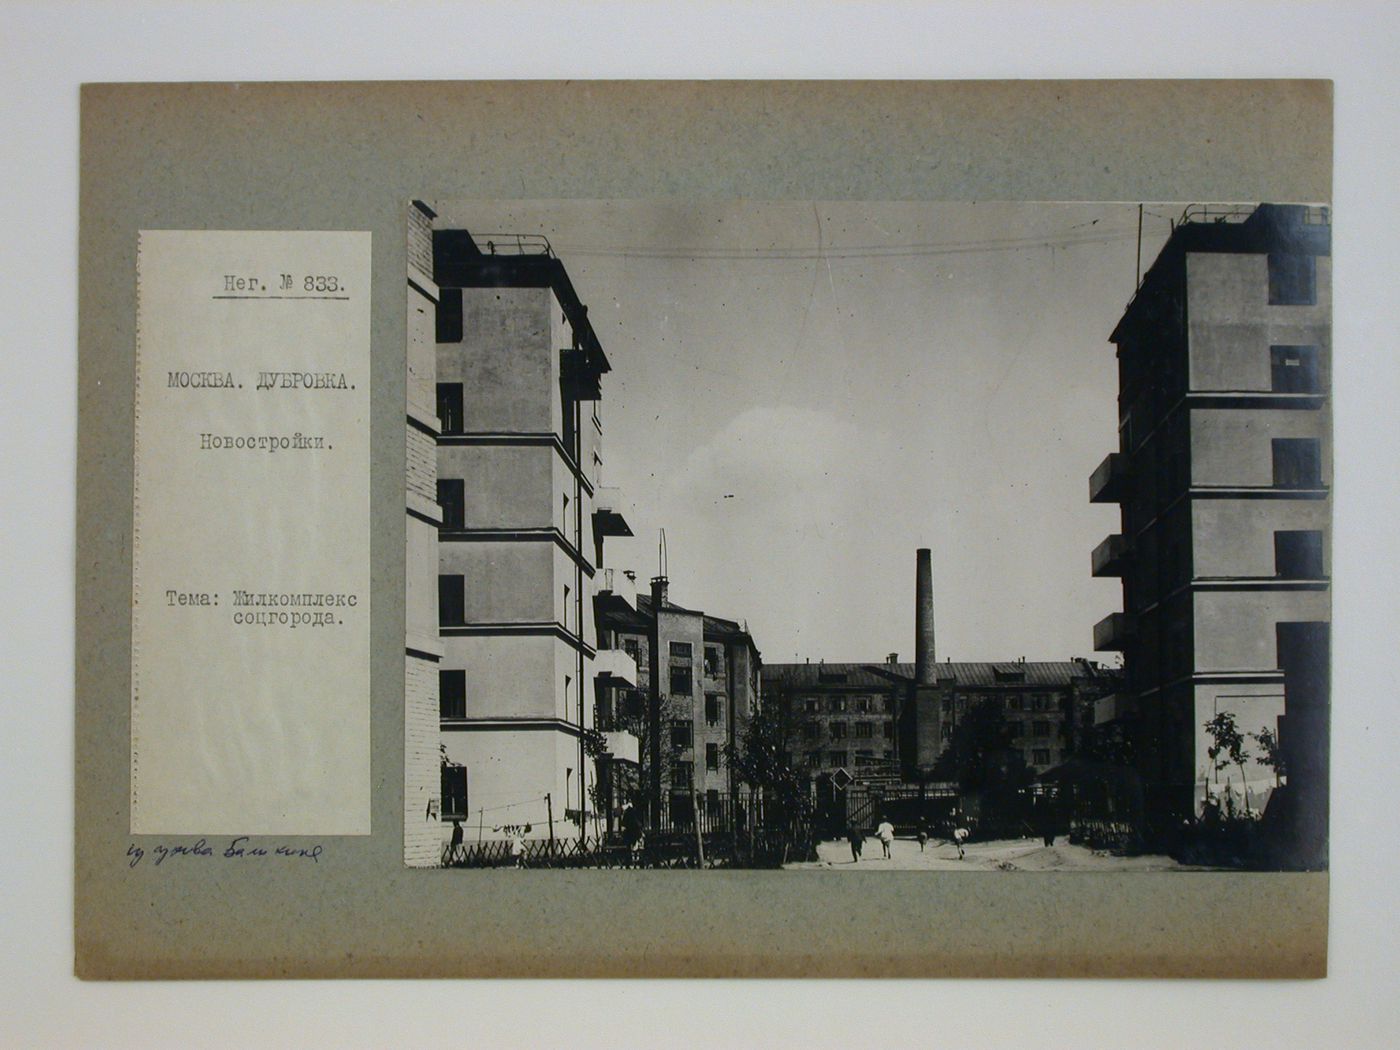 View of housing in the Dubrovka complex with a smokestack and factory [?] in the background, Moscow, Soviet Union (now in Russia)